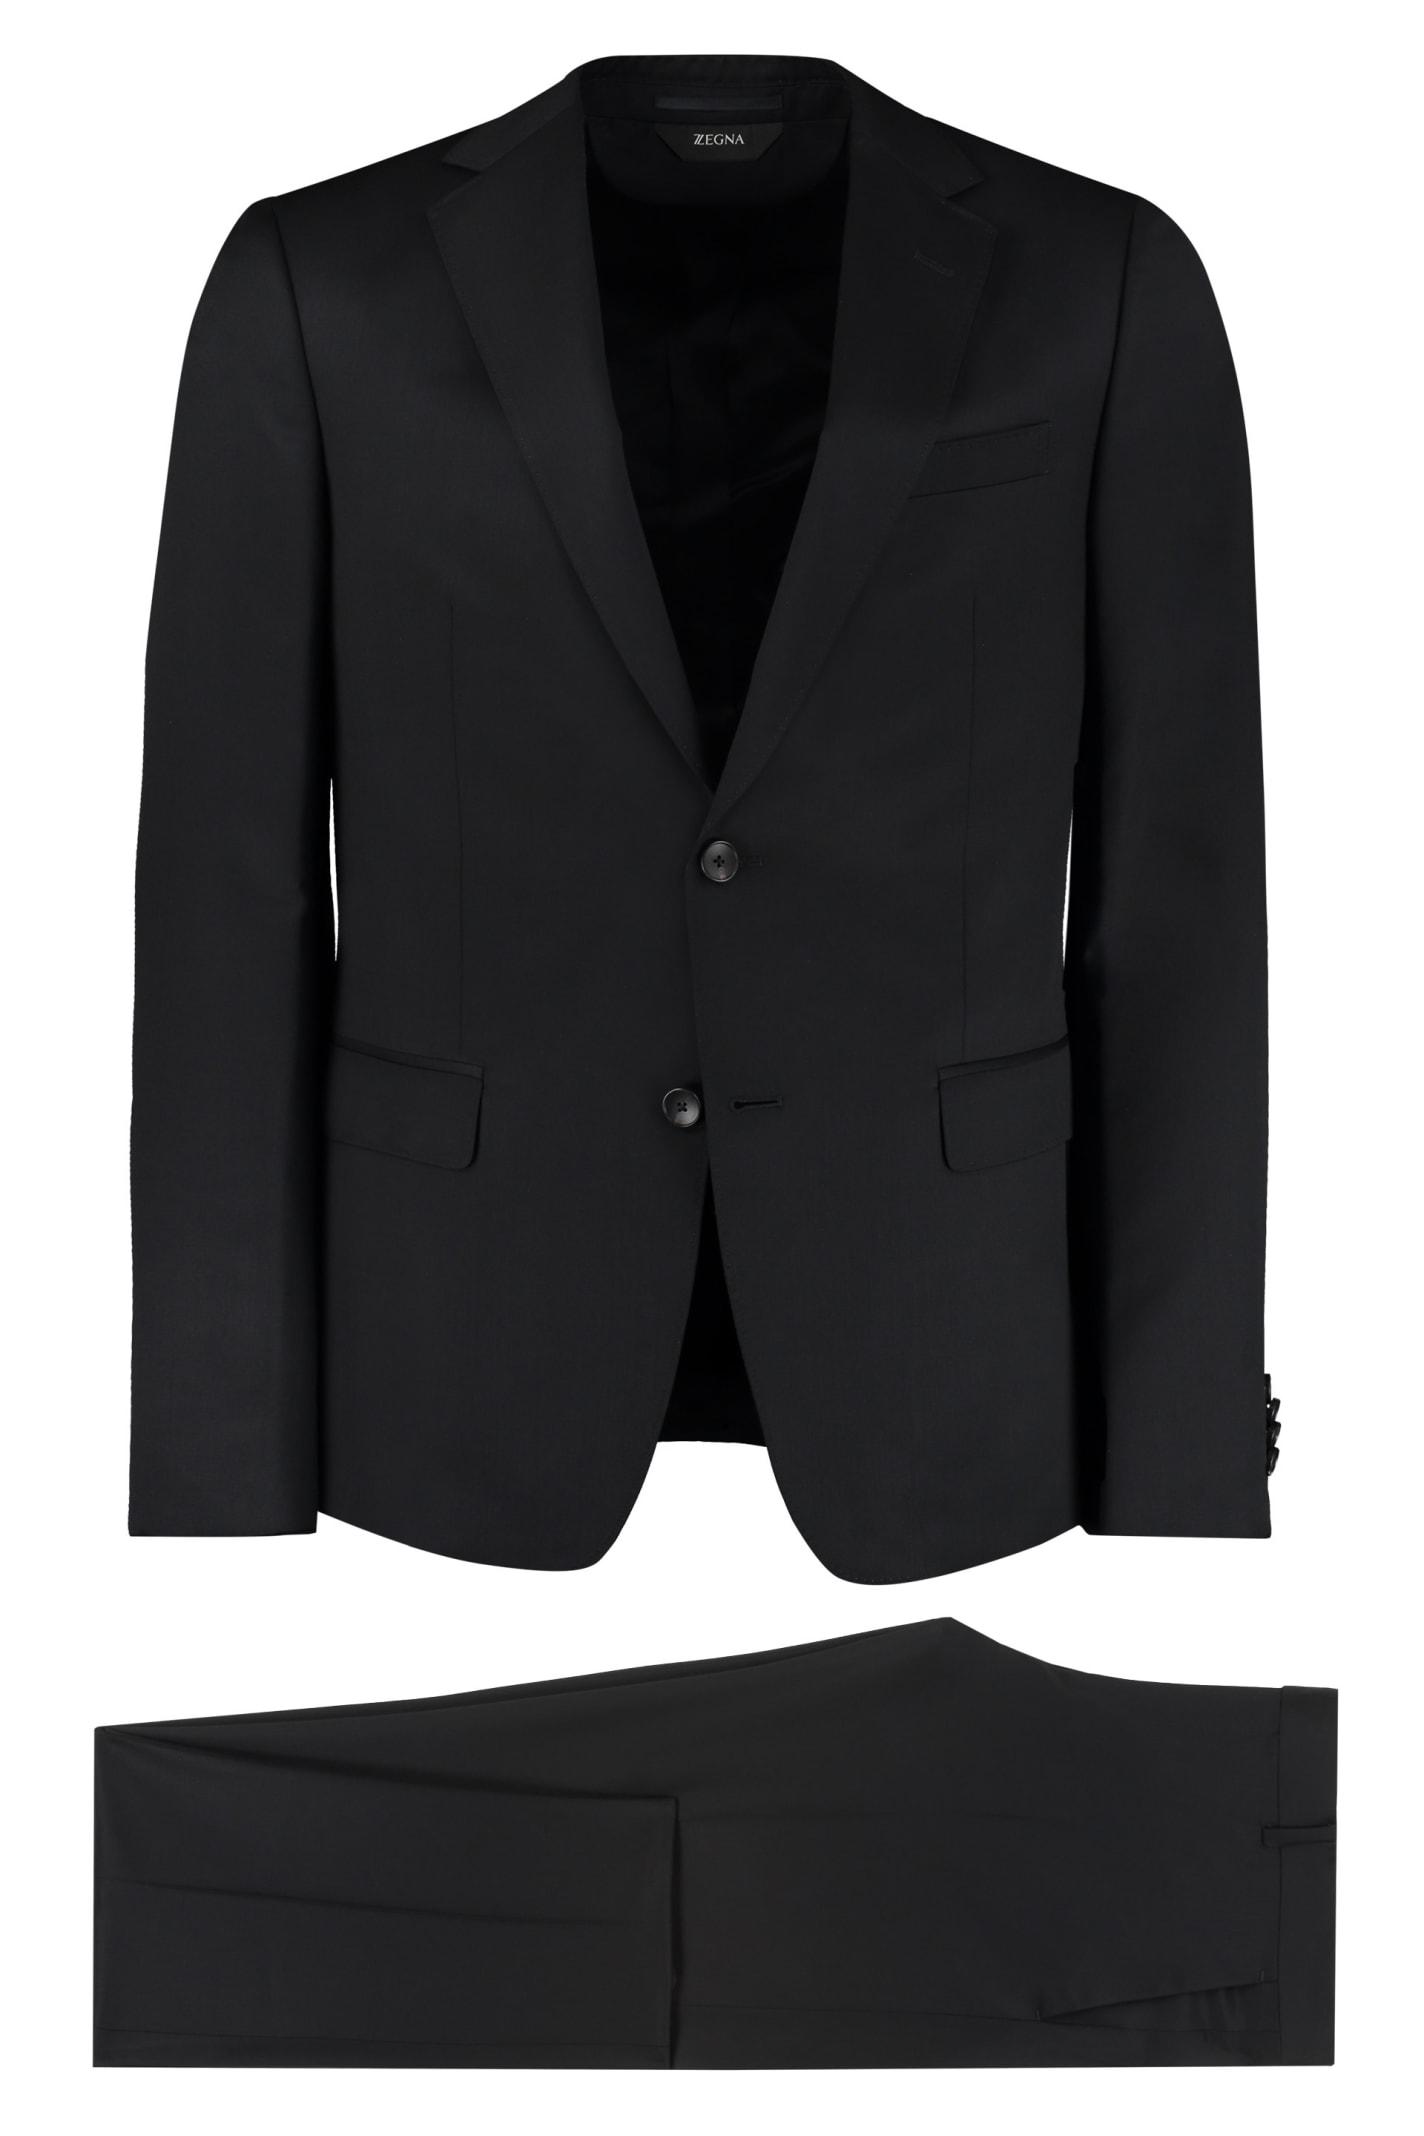 Zegna Wool And Mohair Two Piece Suit in Black for Men | Lyst